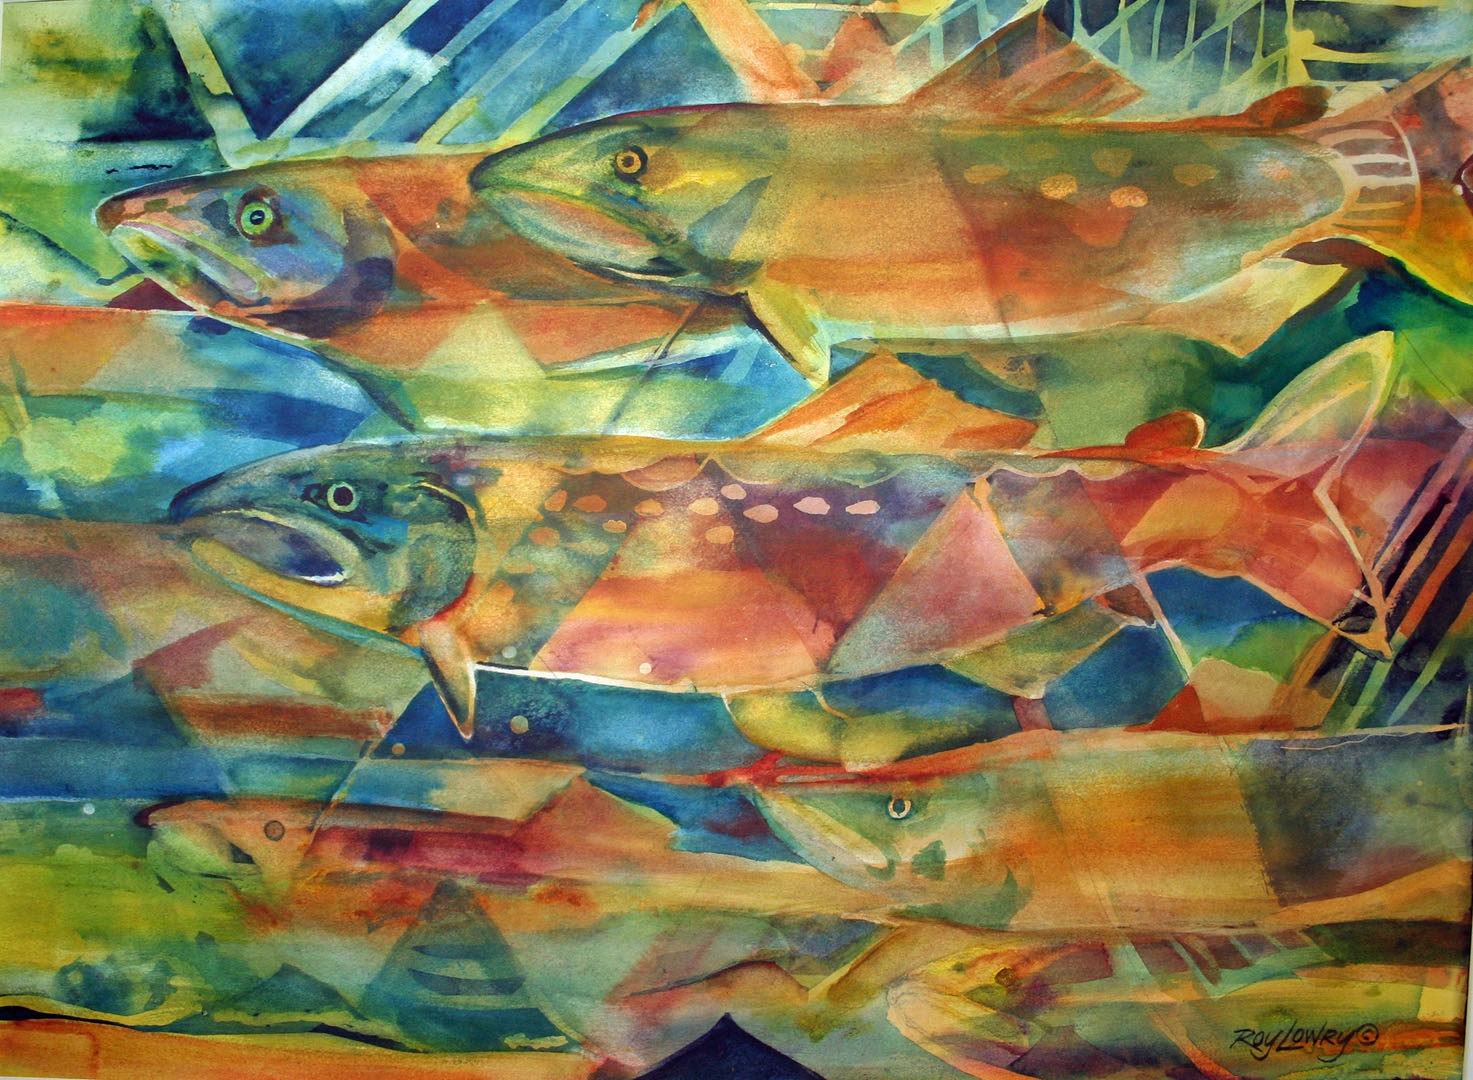 Salmon Montage, Watercolor on paper, 30 x 22